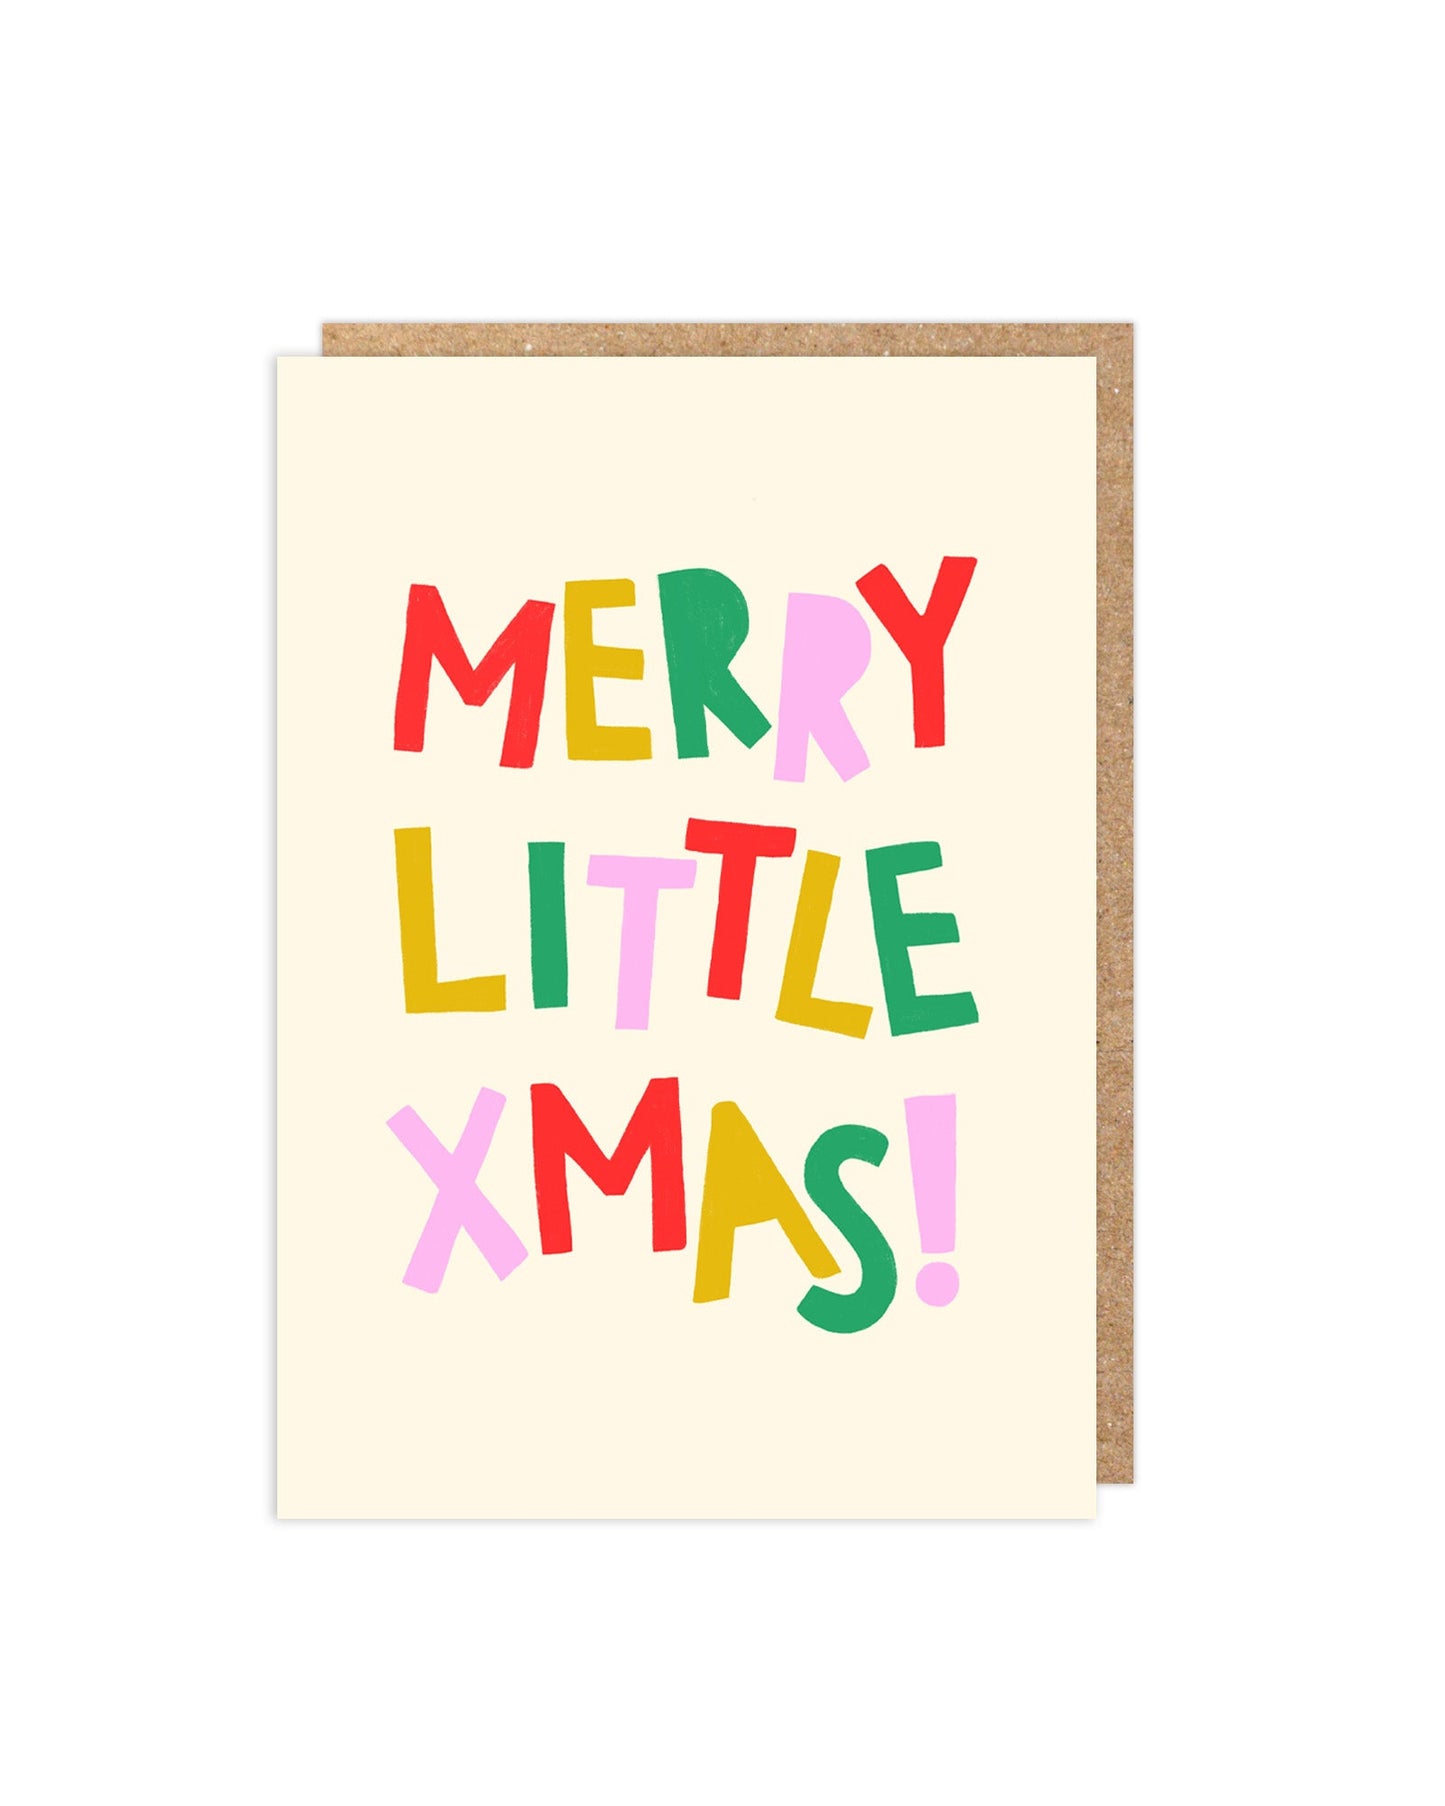 Merry Little Xmas! Typographic Christmas Card